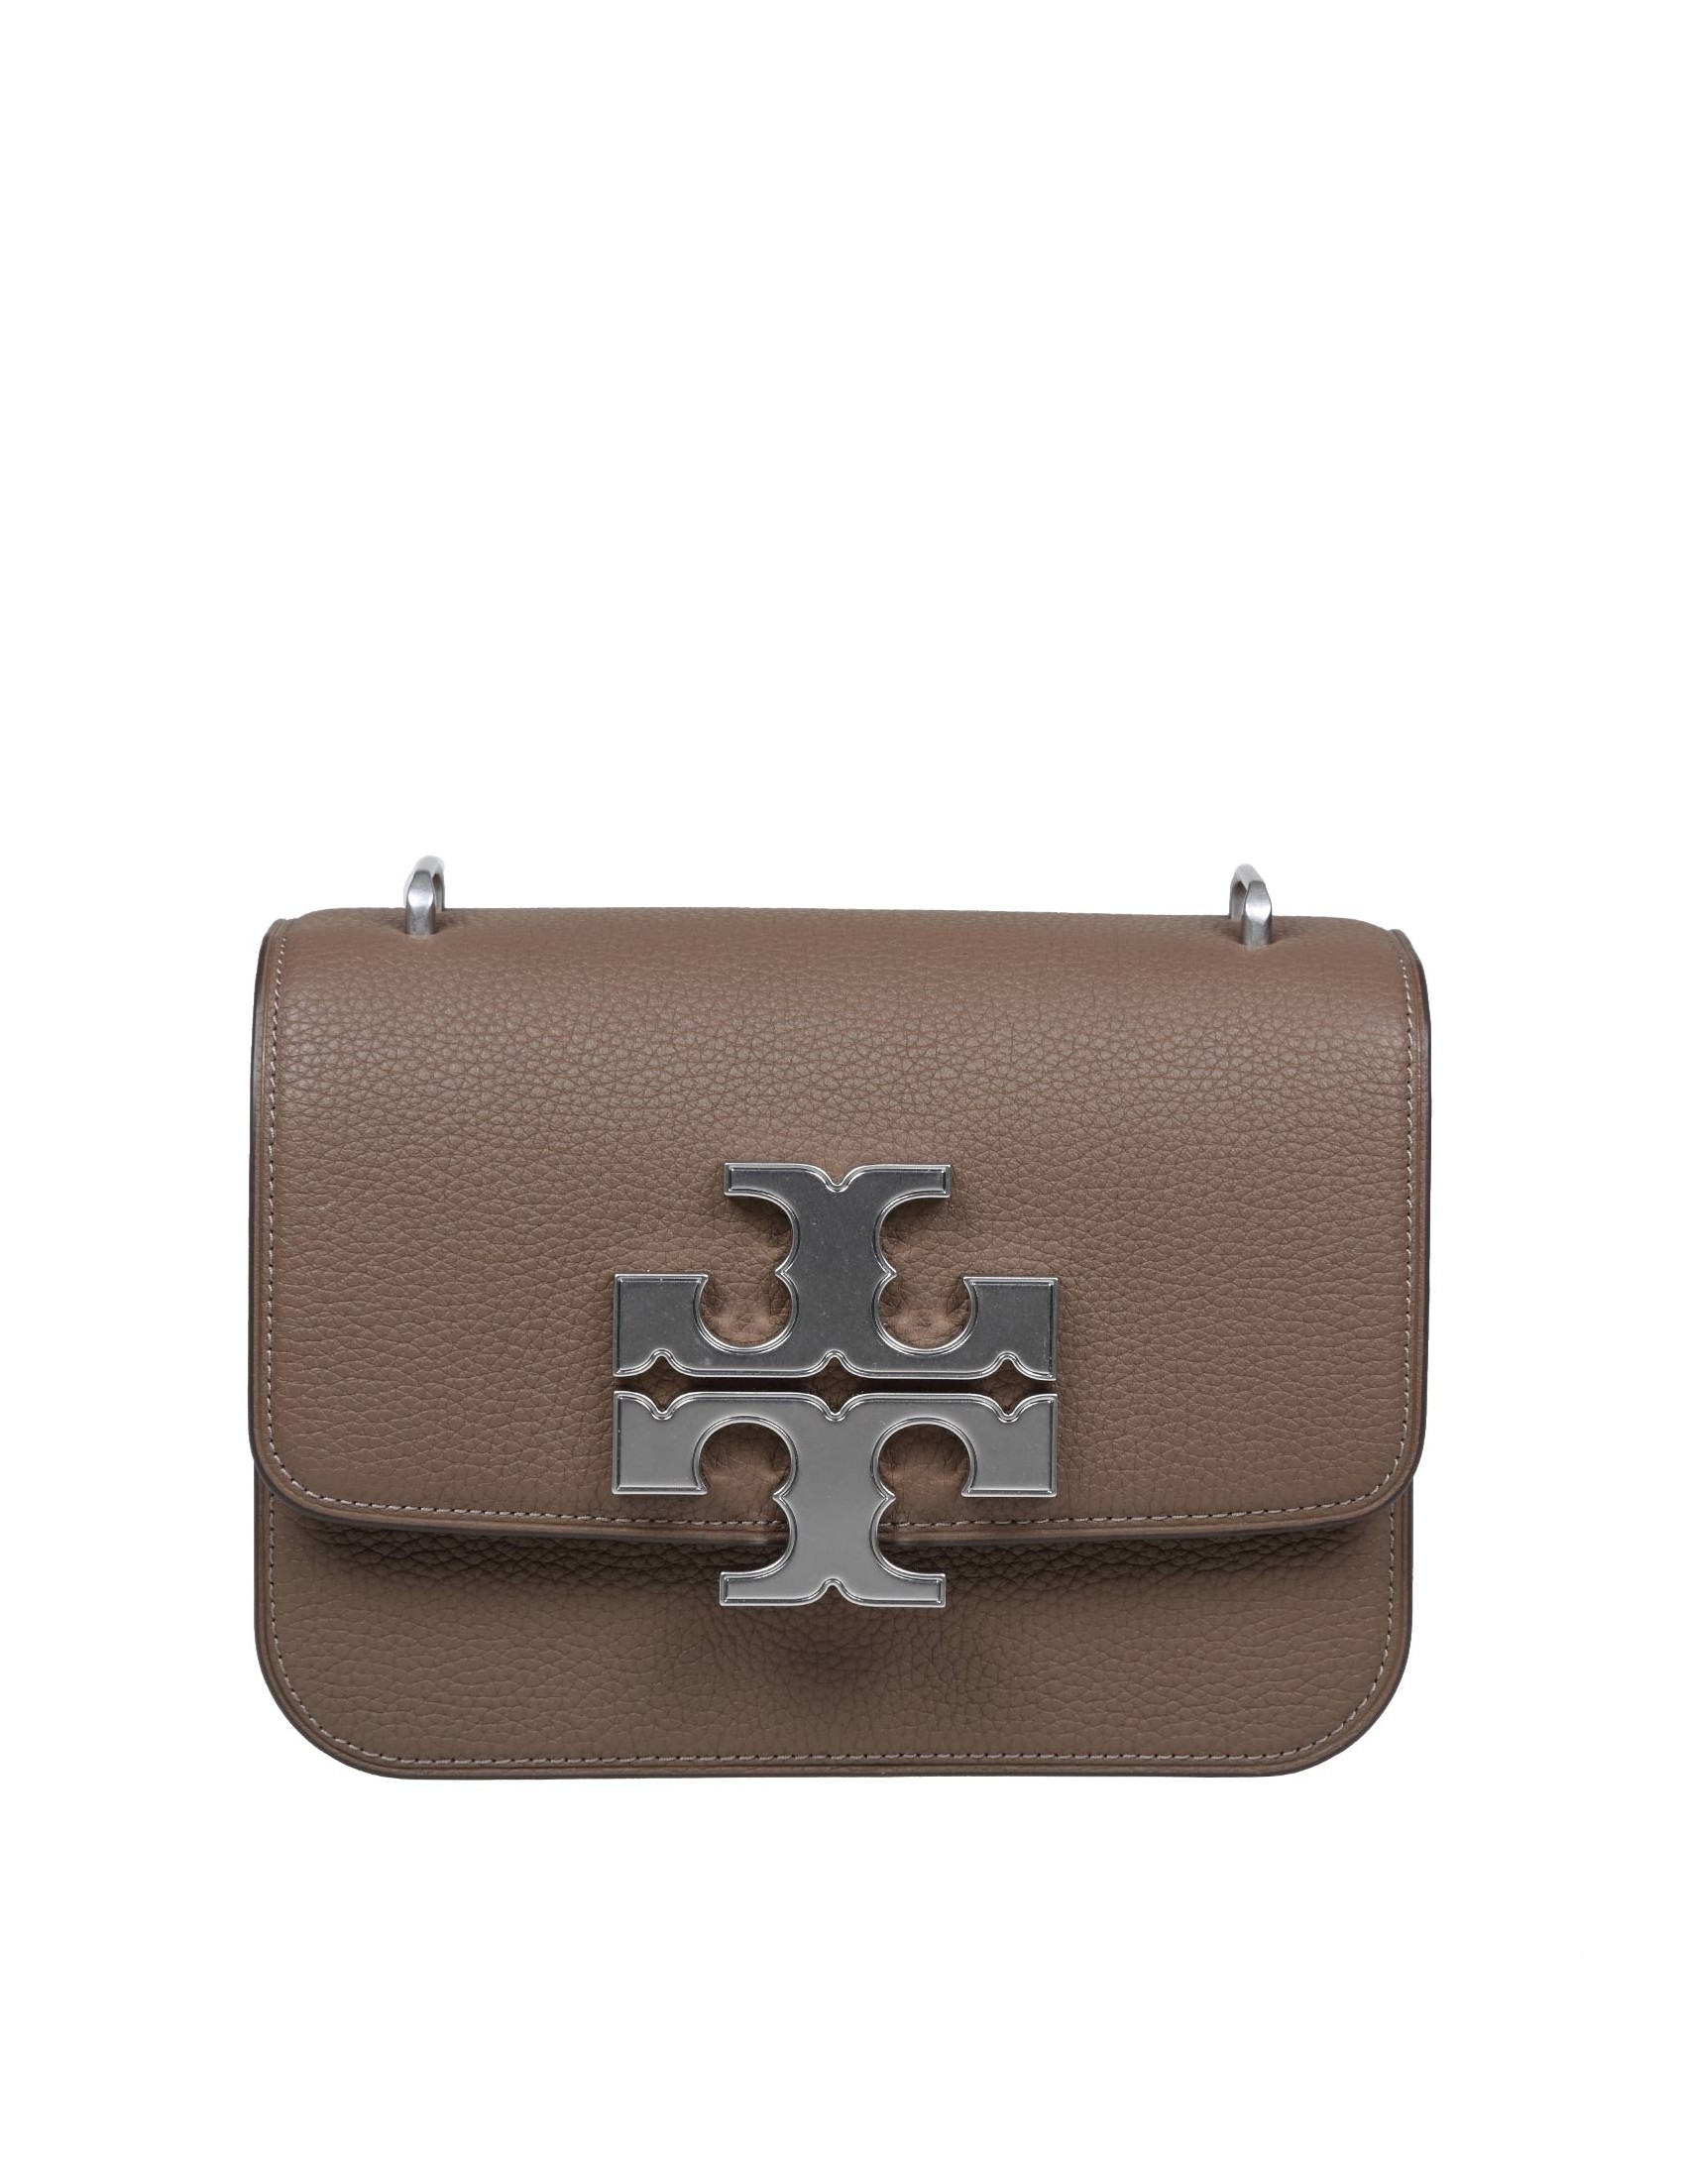 TORY BURCH SMALL ELEANOR SHOULDER BAG IN LEATHER